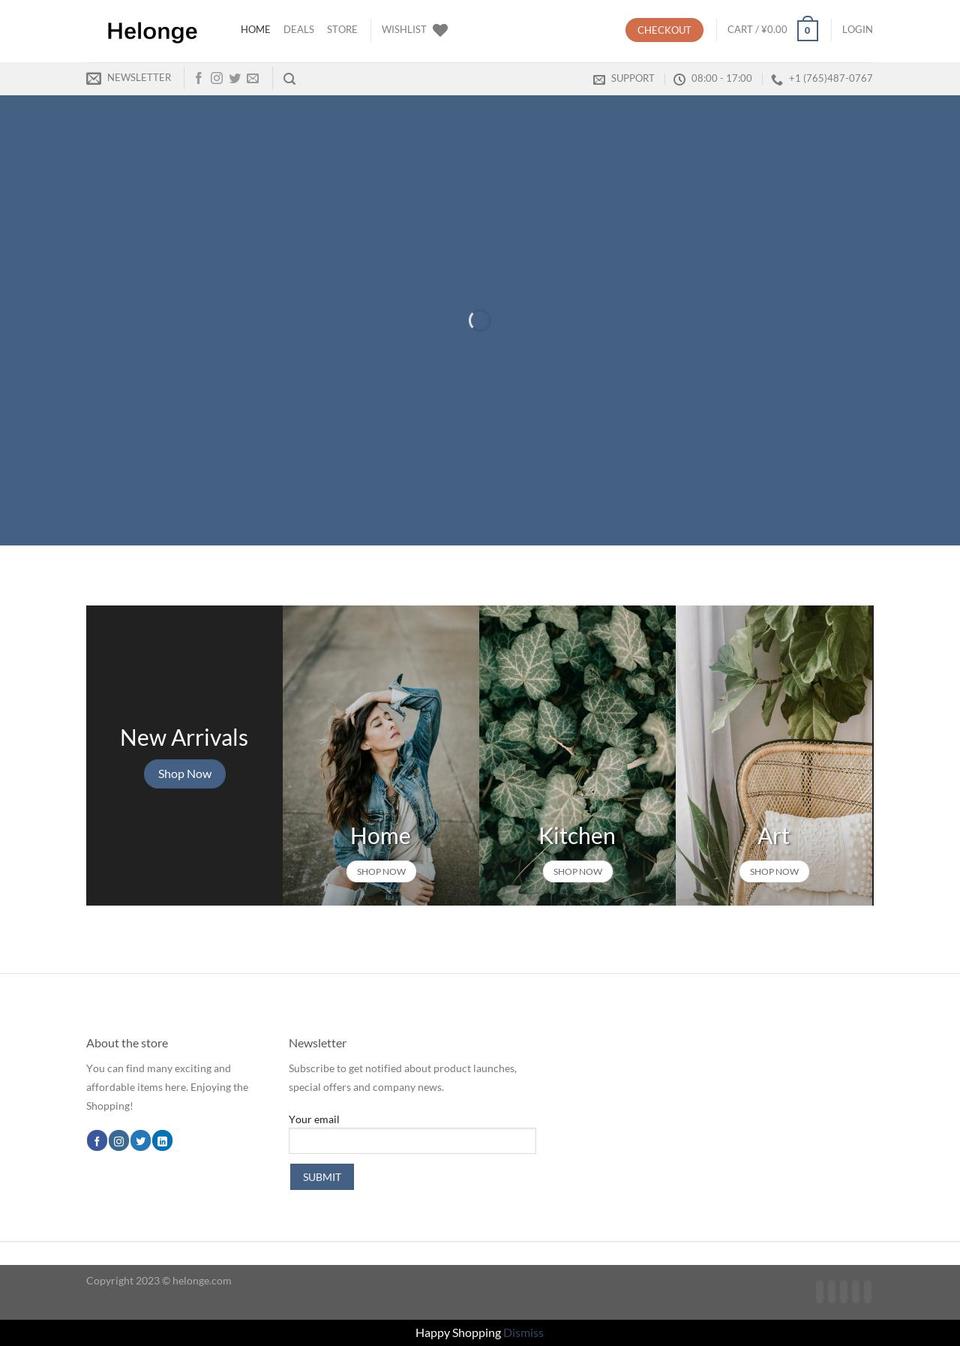 install-me-yourstore-v2-1-9 Shopify theme site example helonge.com